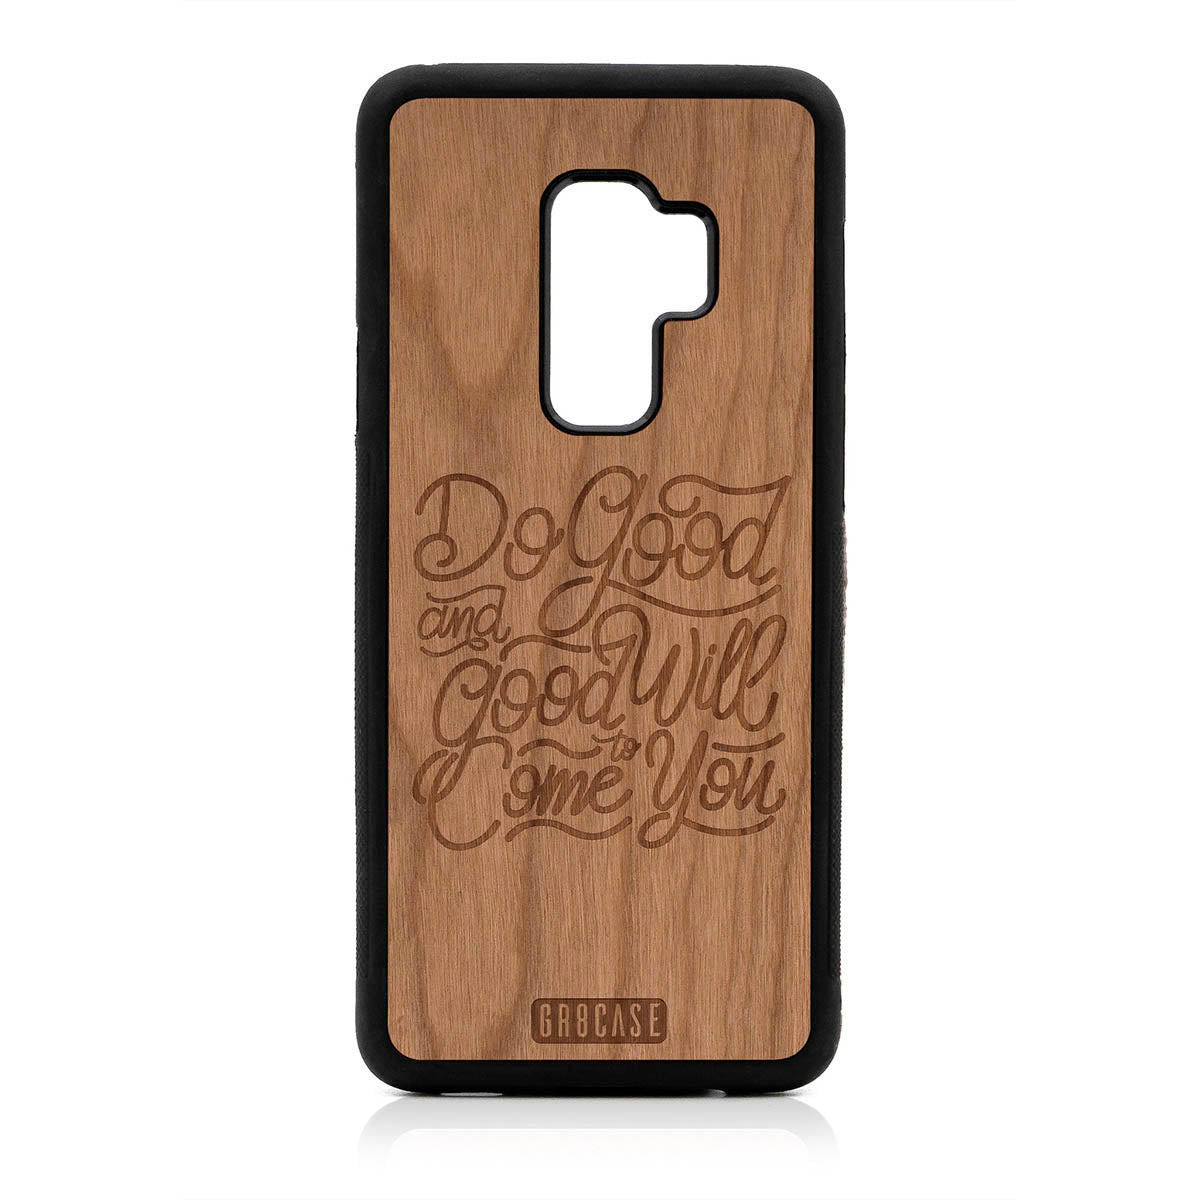 Do Good And Good Will Come To You Design Wood Case For Samsung Galaxy S9 Plus by GR8CASE